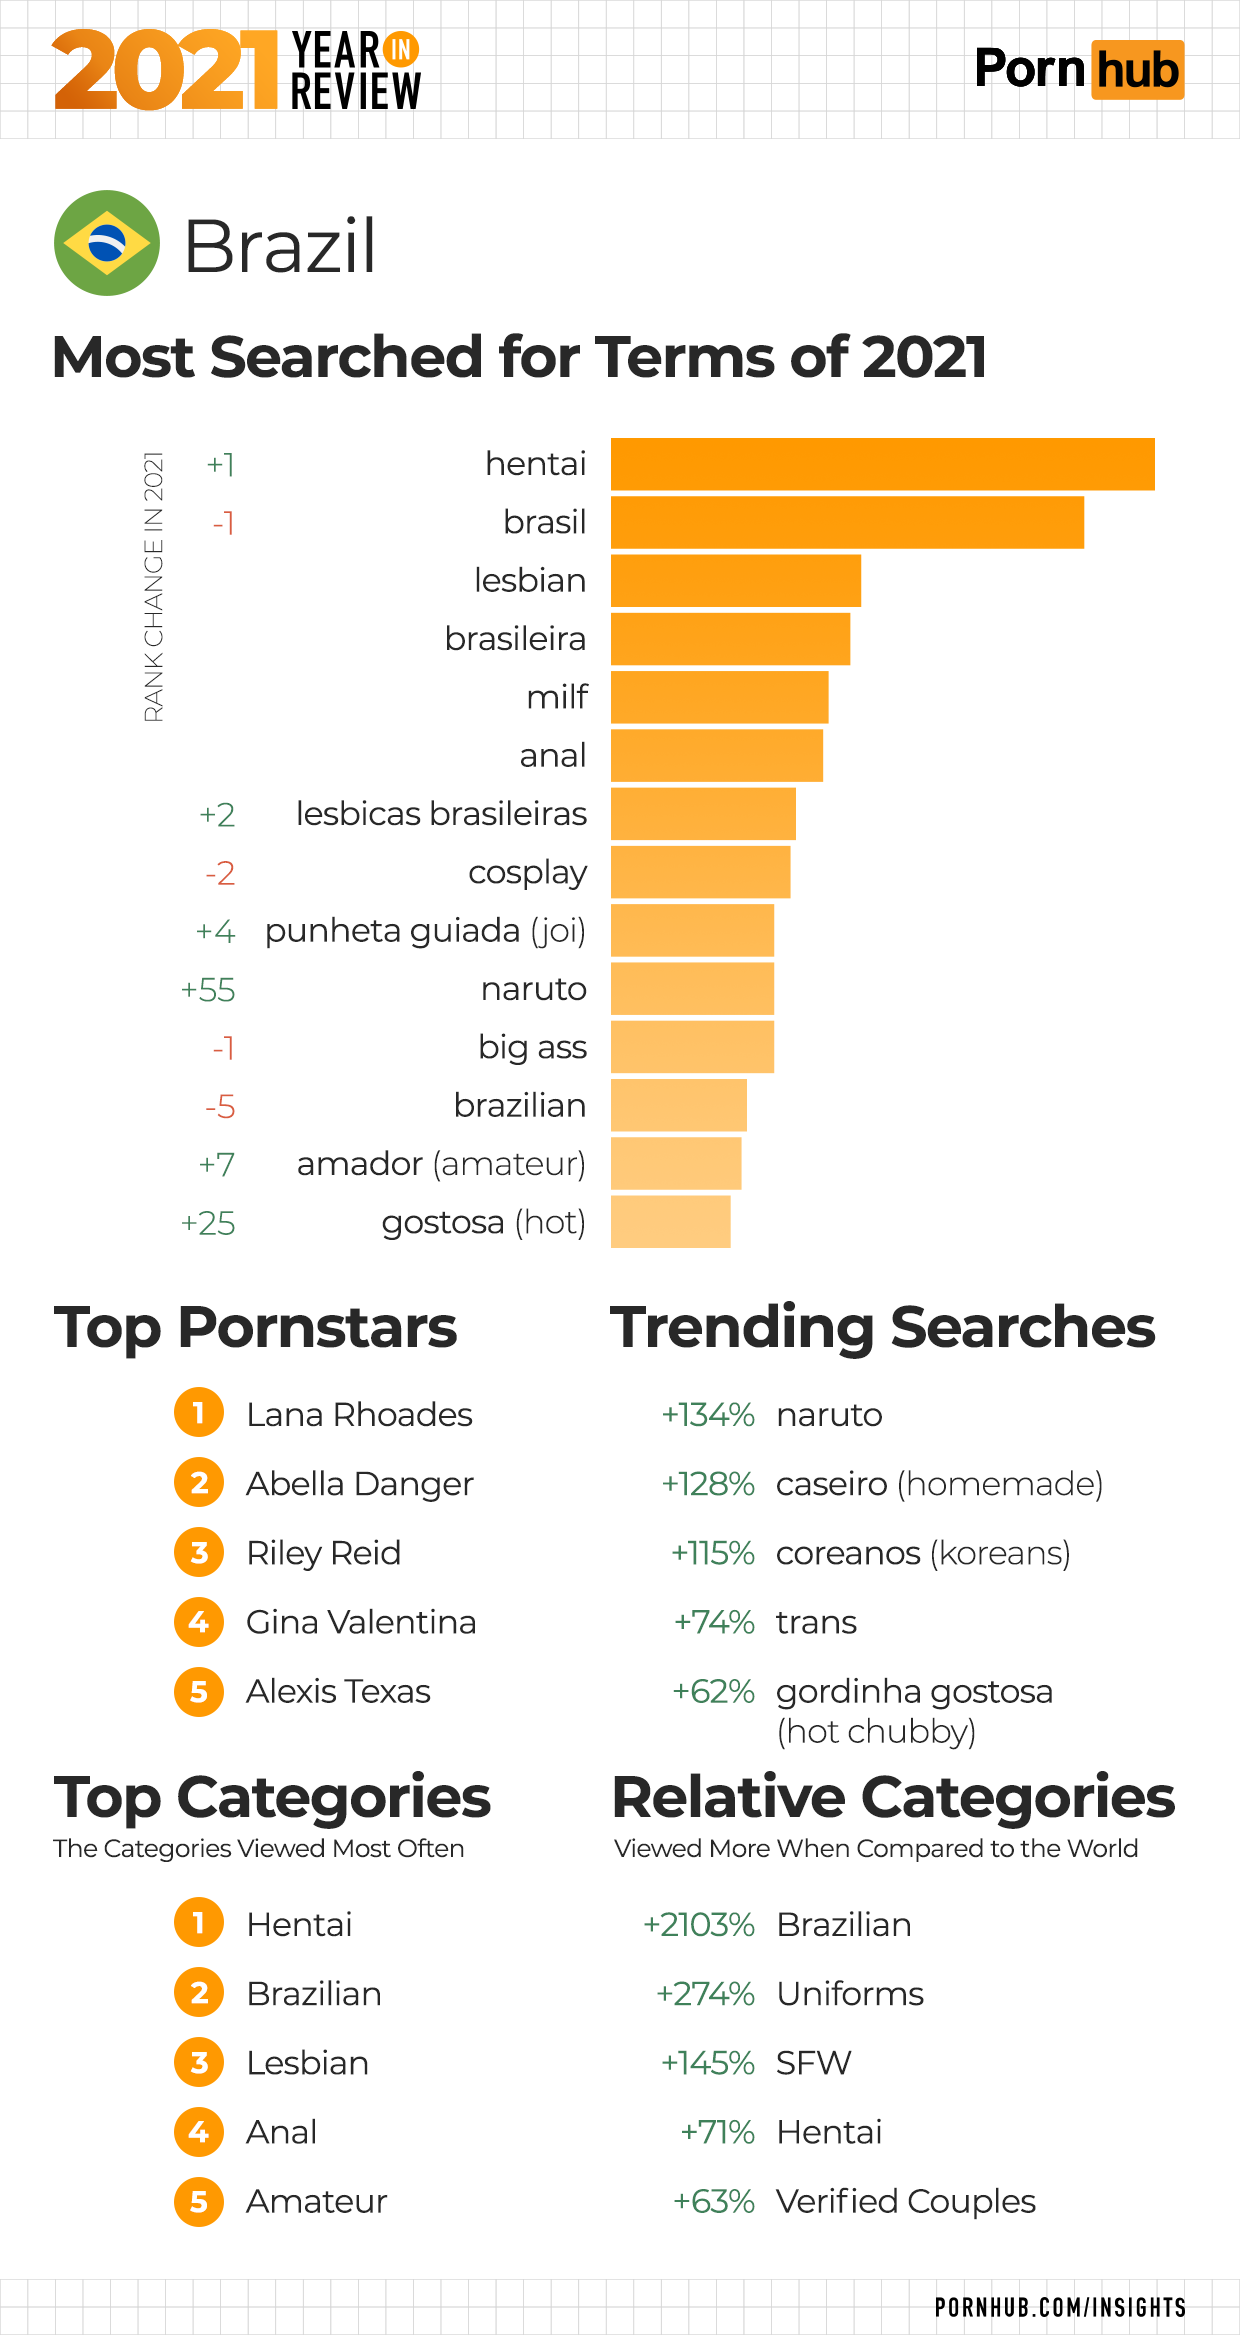 2021 Year in Review - Pornhub Insights